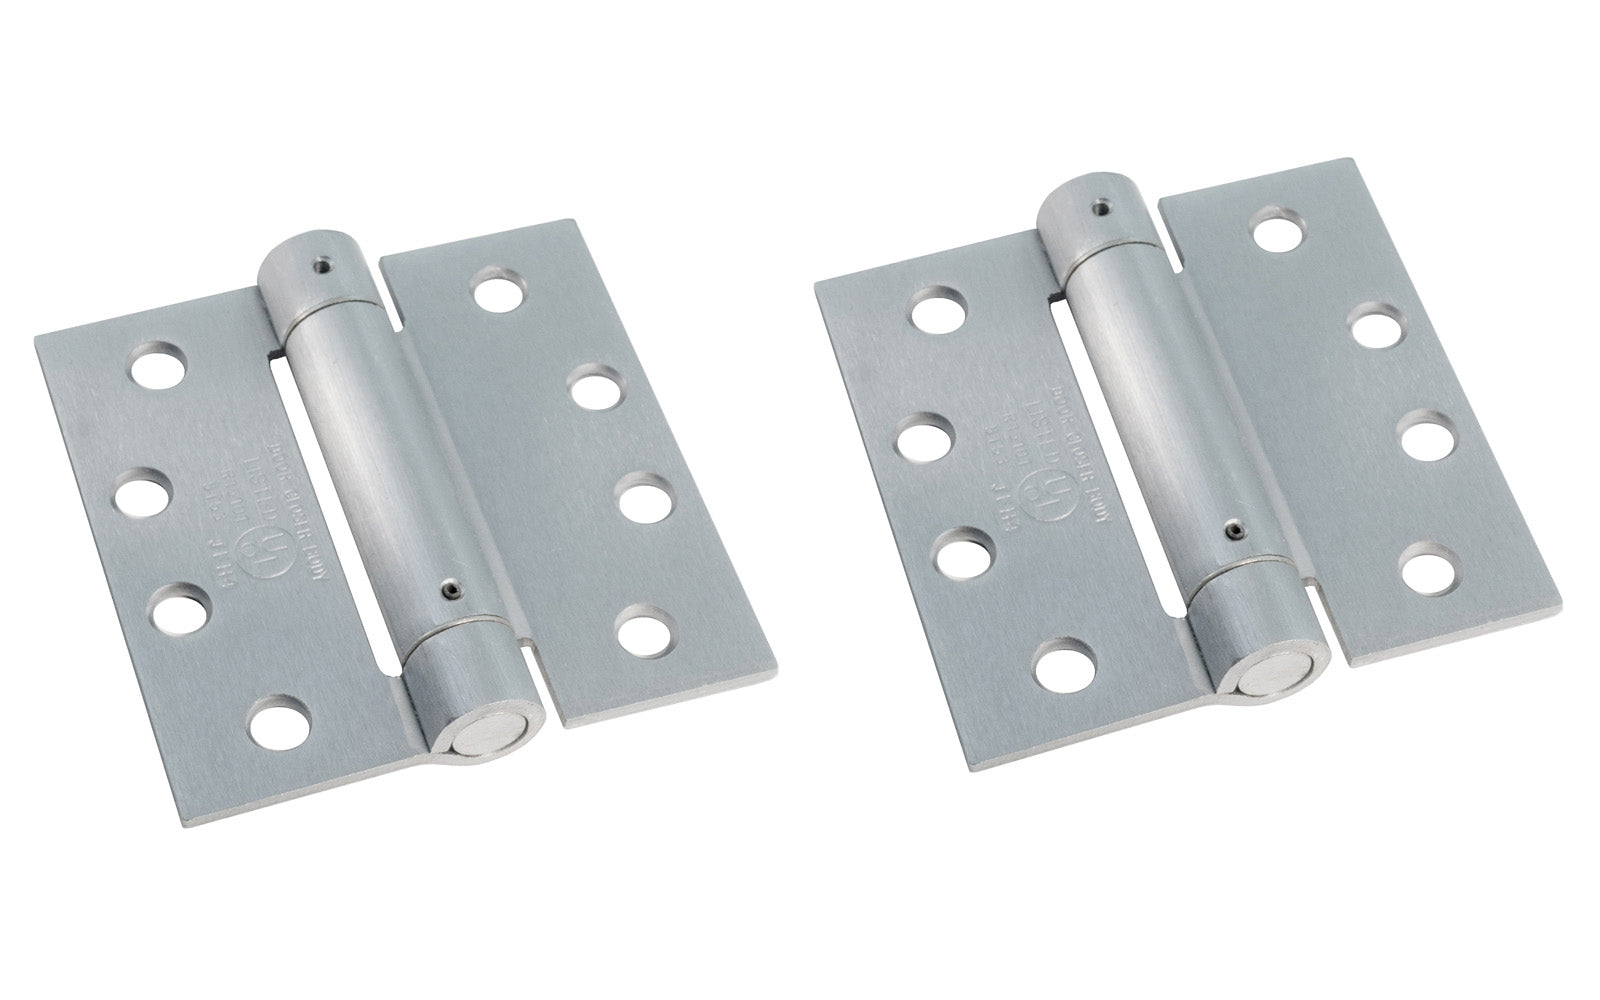 4" Satin Chrome Spring Hinge is designed for hanging self-closing doors in basements, stairways, garages, & entrances, etc. Can be used in residential, commercial, & apartment buildings. Hinge is UL approved. Closing speed is adjustable. Fits standard hinge cutout. Square corner automatic door-closing spring hinge. Satin Brass Finish on cold-rolled steel material. Sold as two hinges in pack.  Ultra Hardware No. 35337